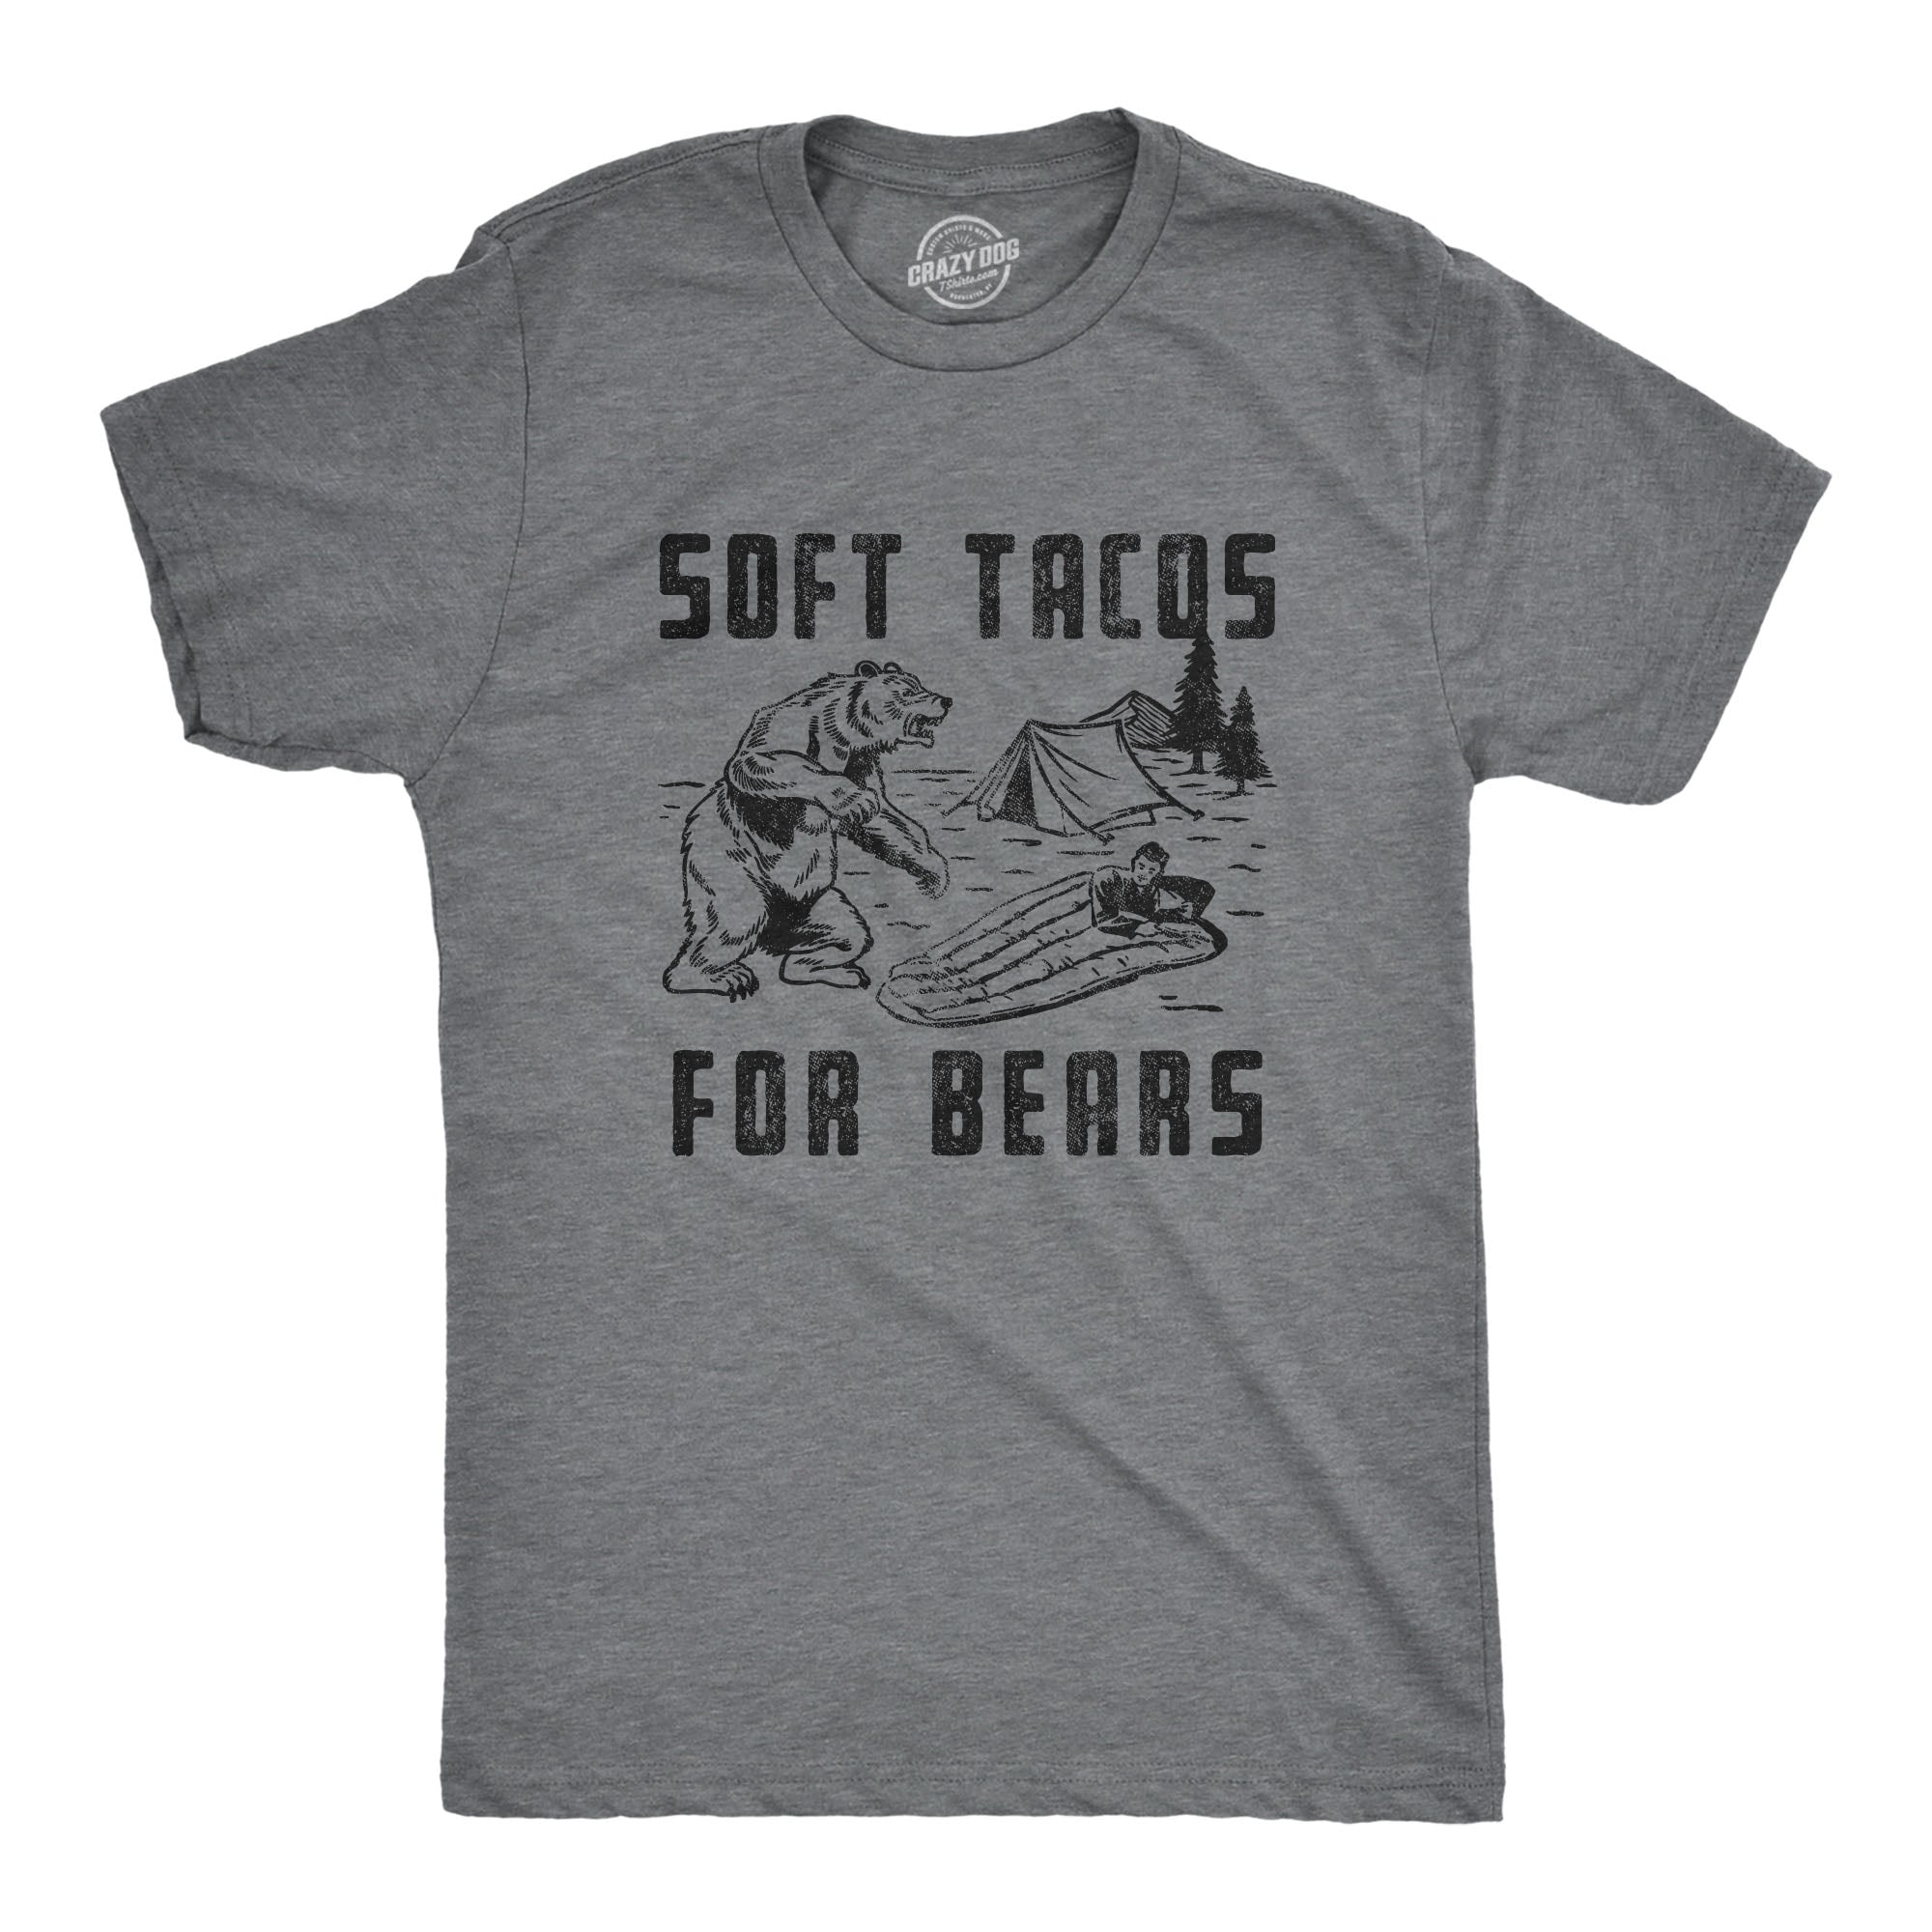 Funny Dark Heather Grey - Soft Tacos Soft Tacos For Bears Mens T Shirt Nerdy Camping Food Animal Tee